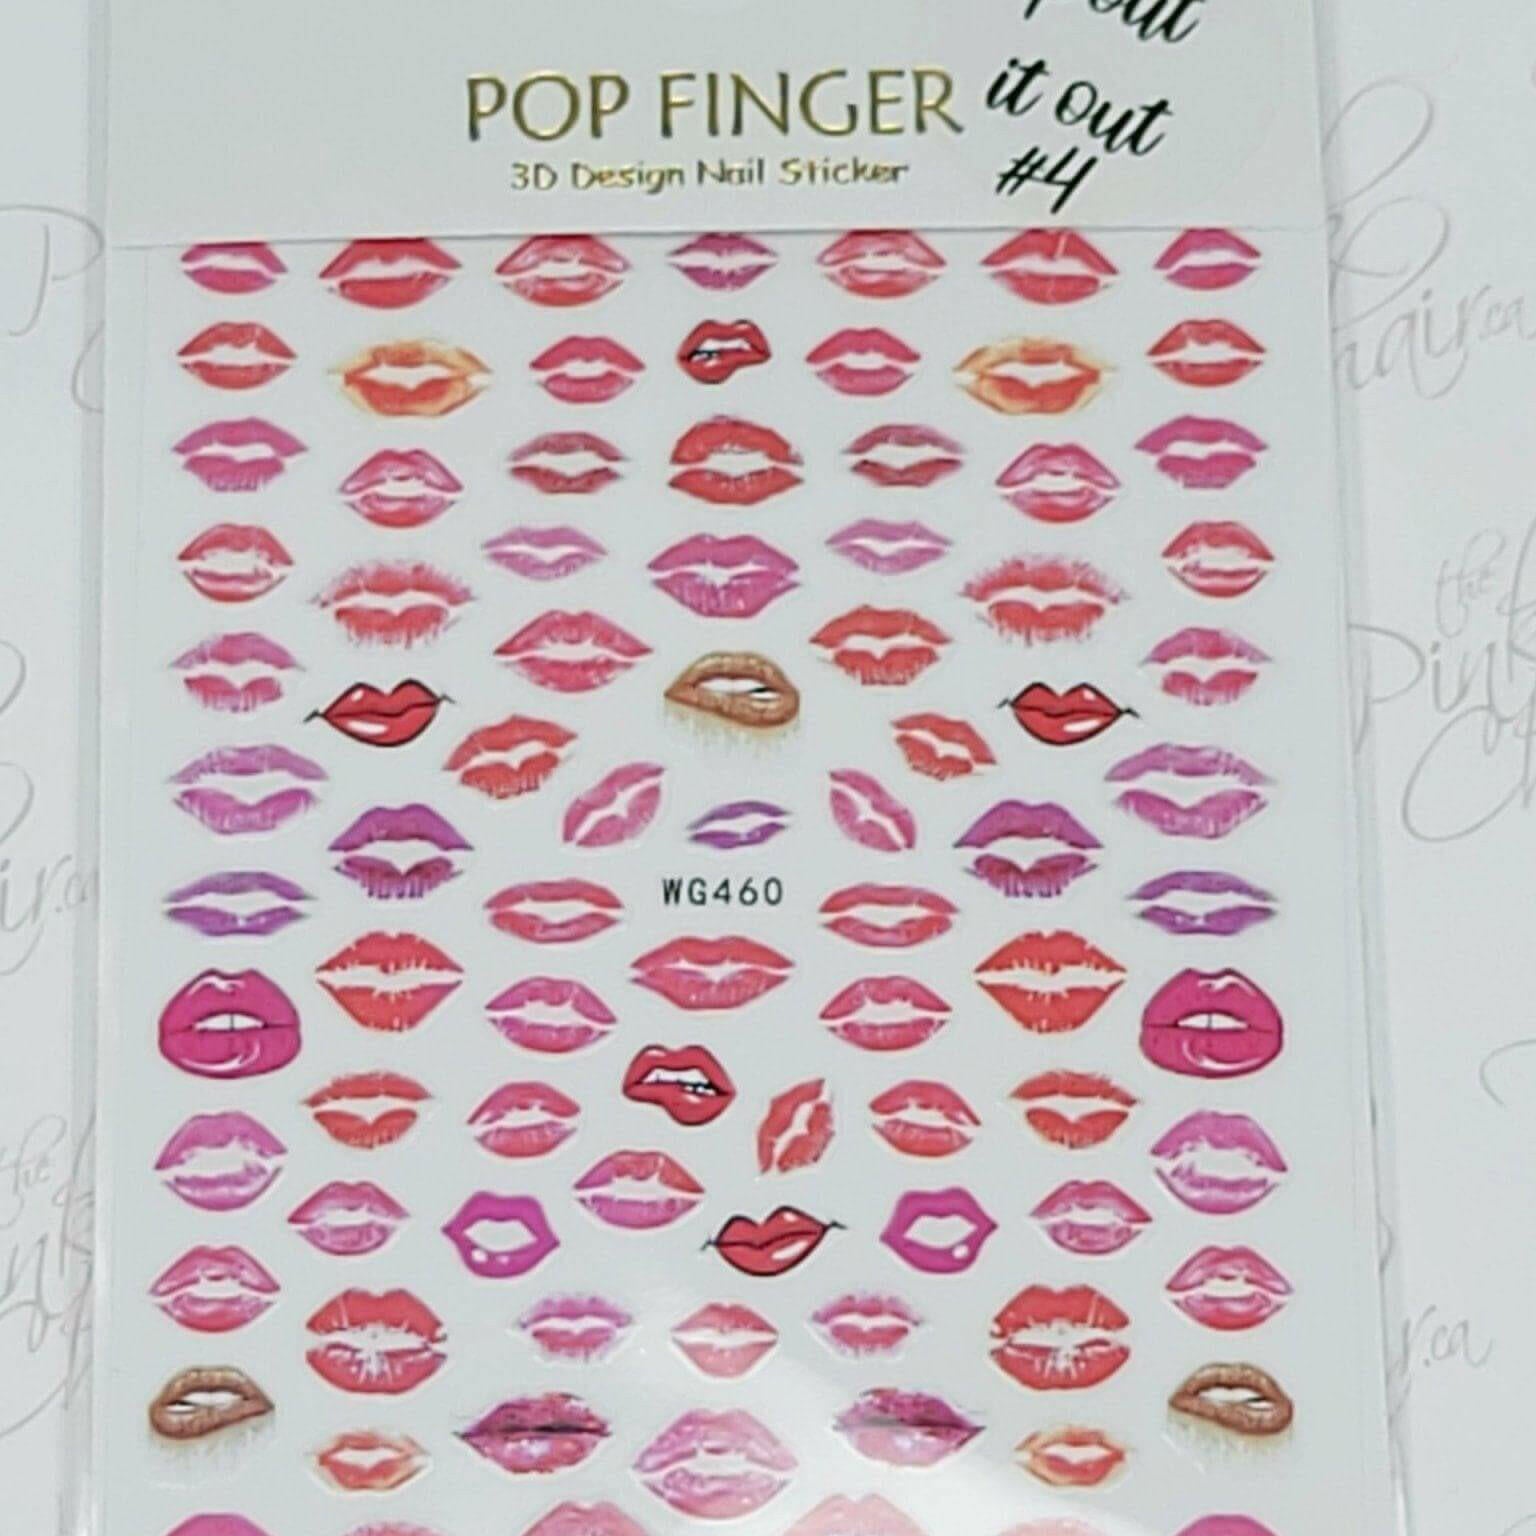 Pout it Out Lip #4, Decals - thePINKchair.ca - Nail Art - thePINKchair nail studio